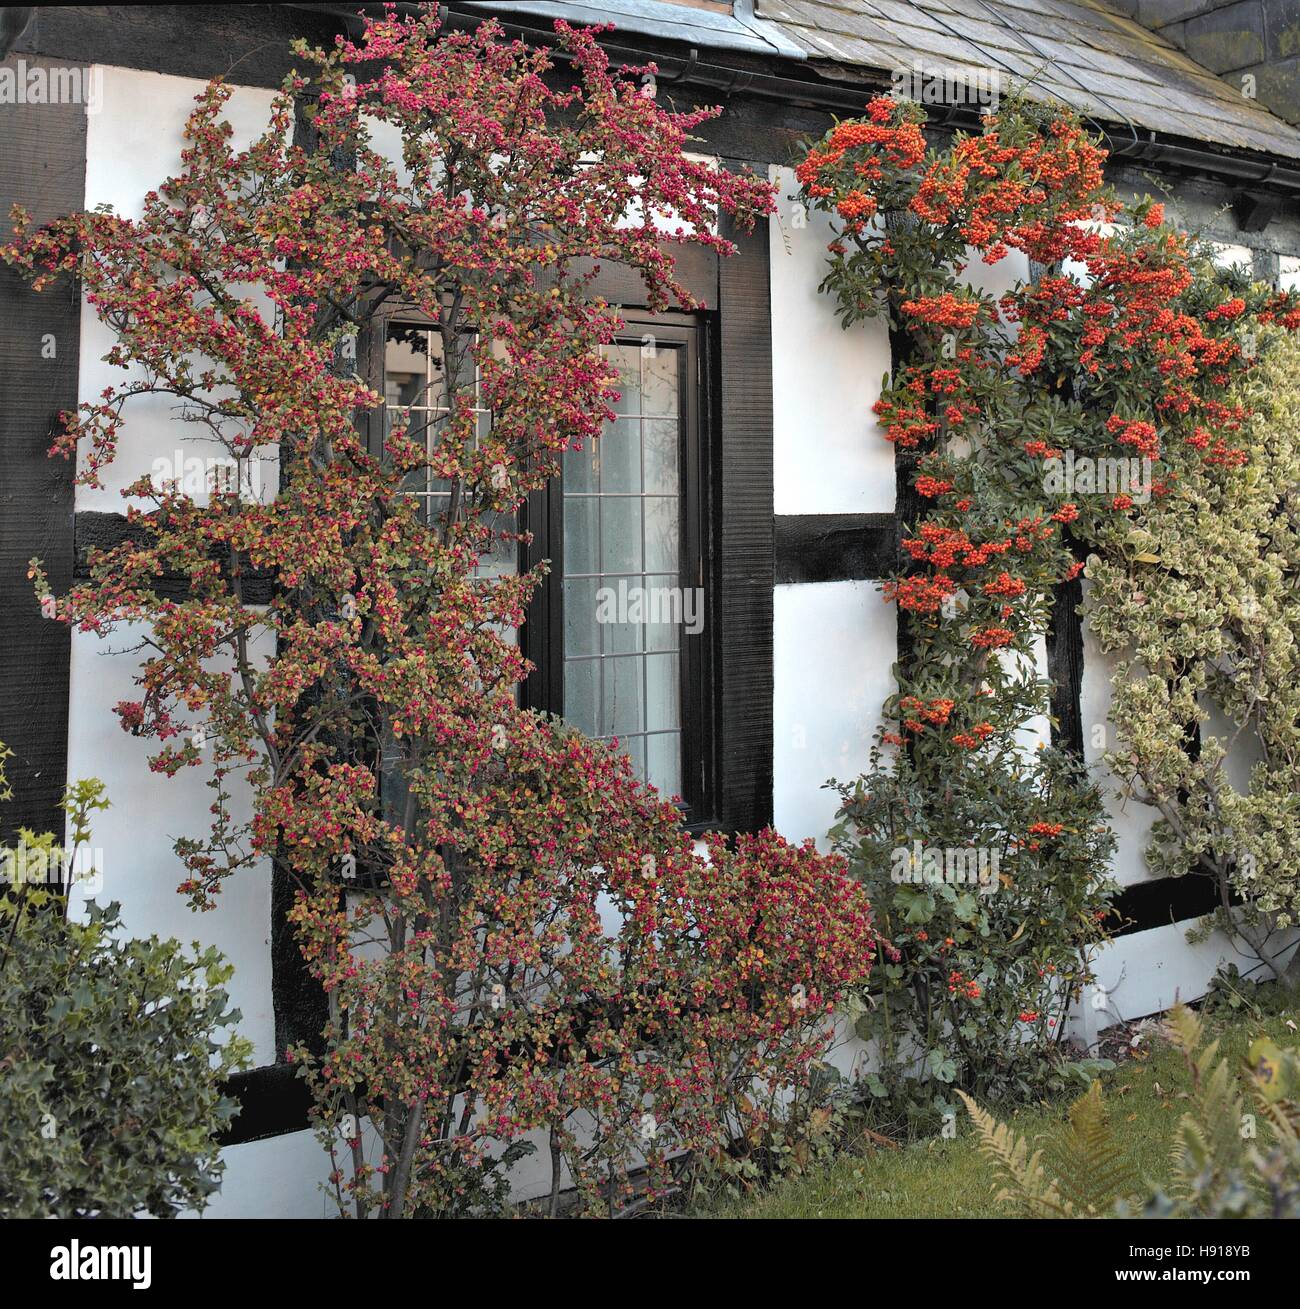 View on window of old english house. Arts and crafts residential building in autumn red berries of hawthorn Stock Photo